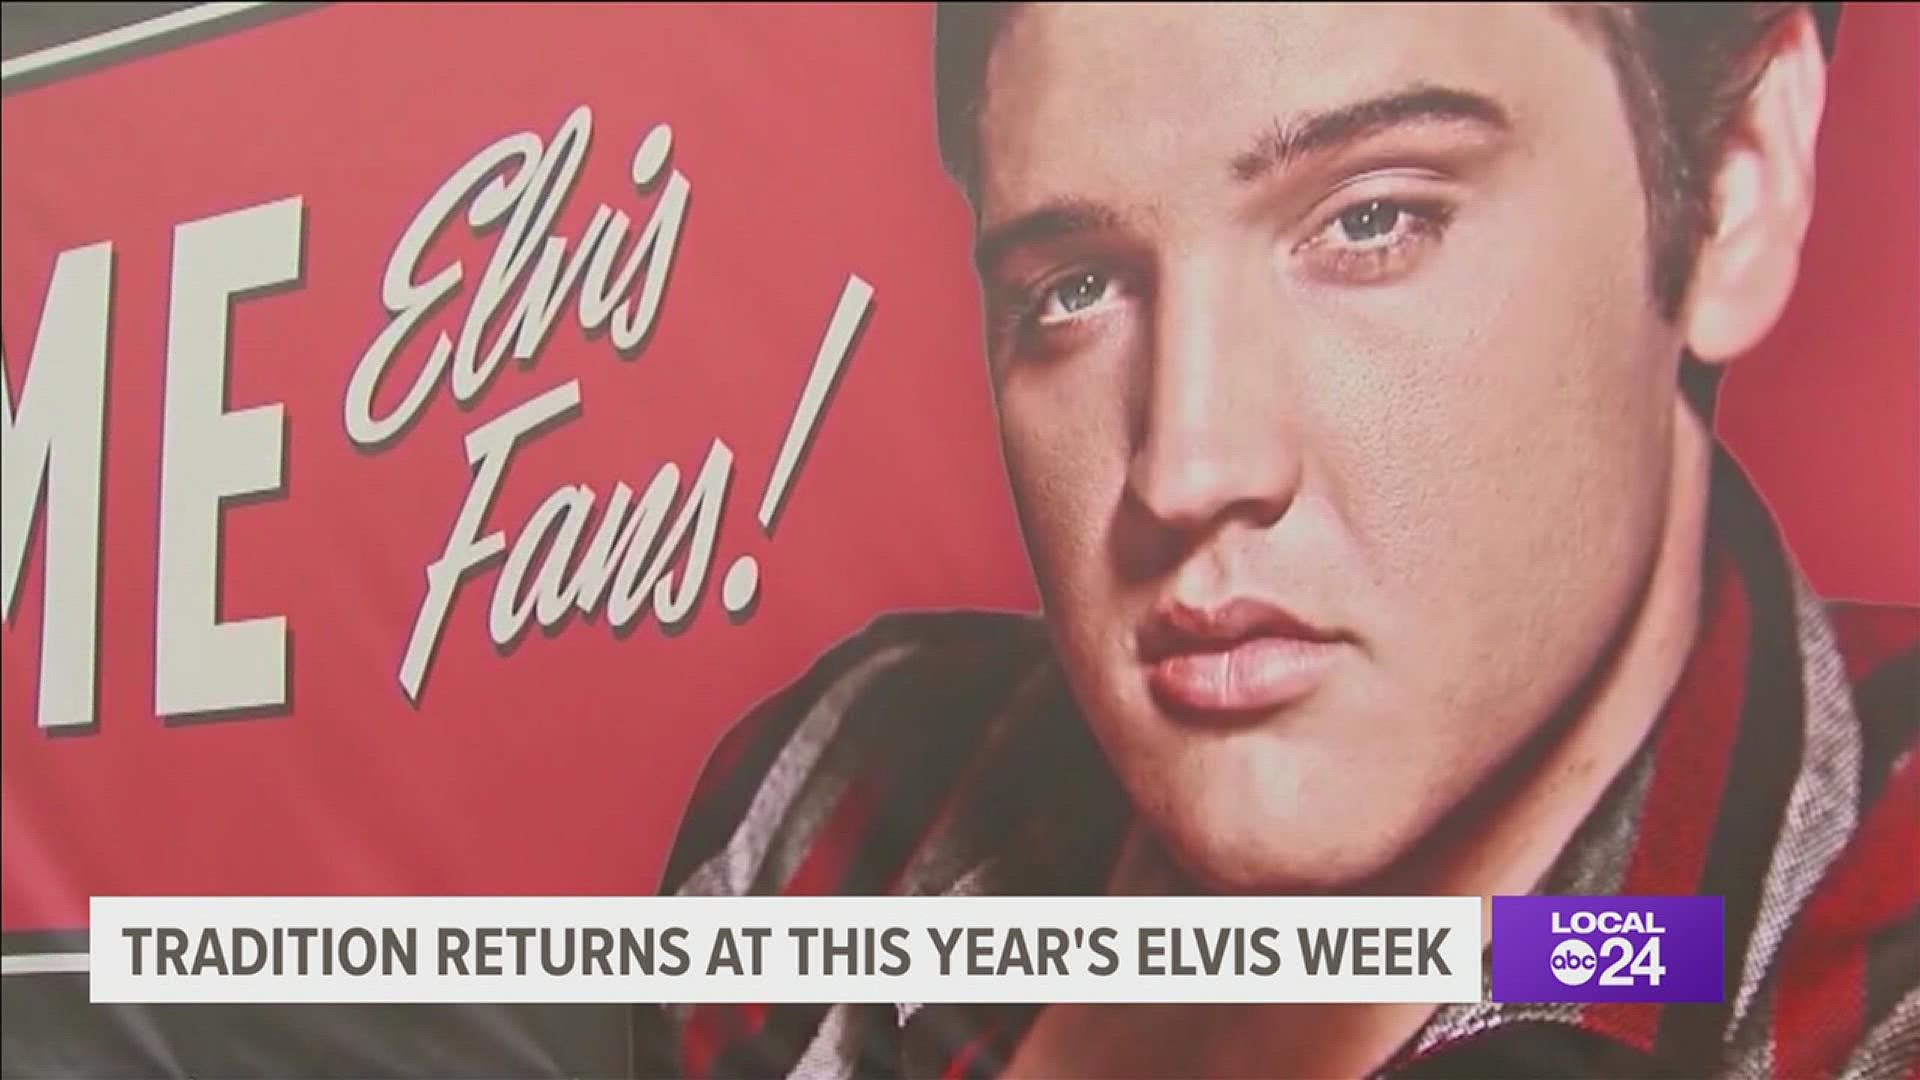 The annual celebration of Elvis Presley's life and death runs from August 11th to 17th.